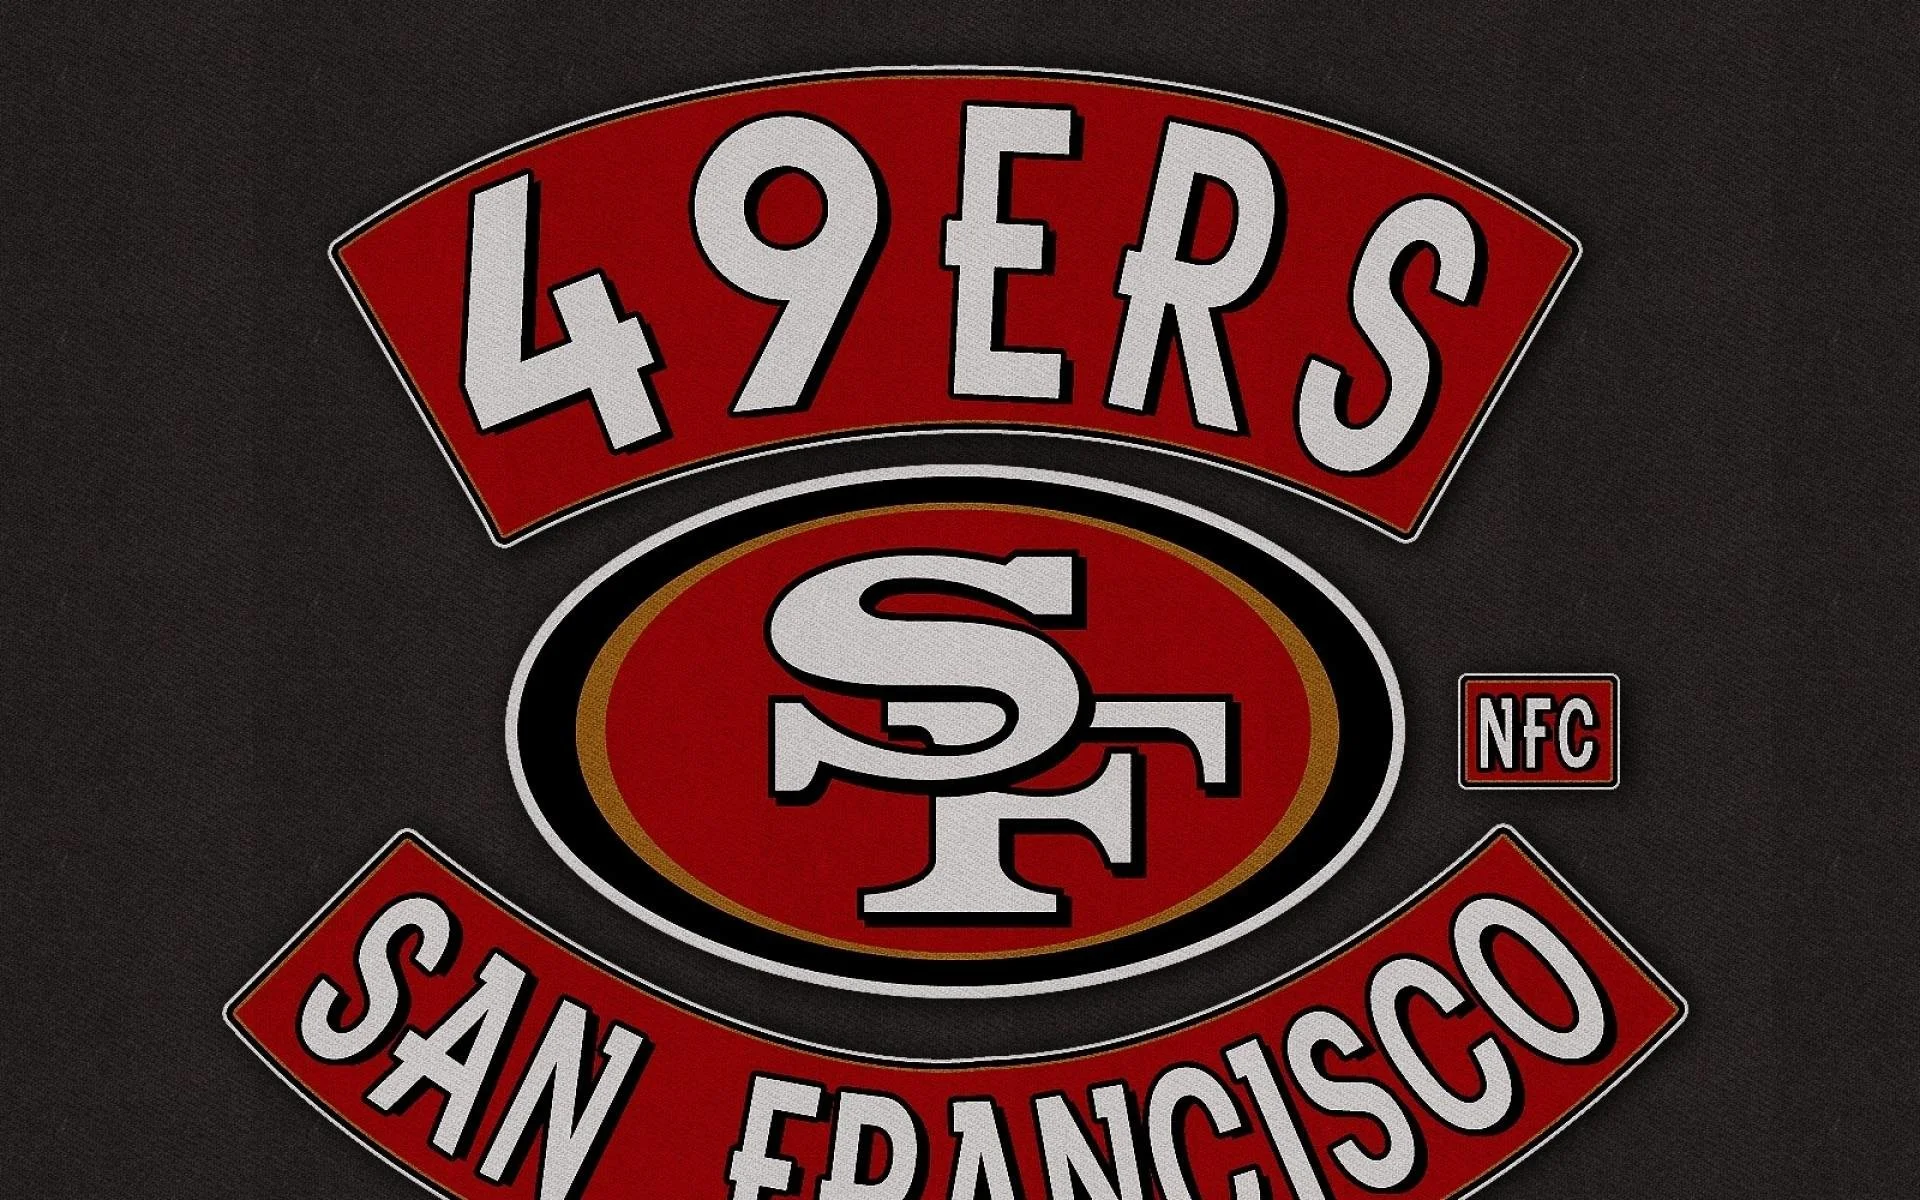 Download San Francisco 49Ers wallpapers for mobile phone free San  Francisco 49Ers HD pictures